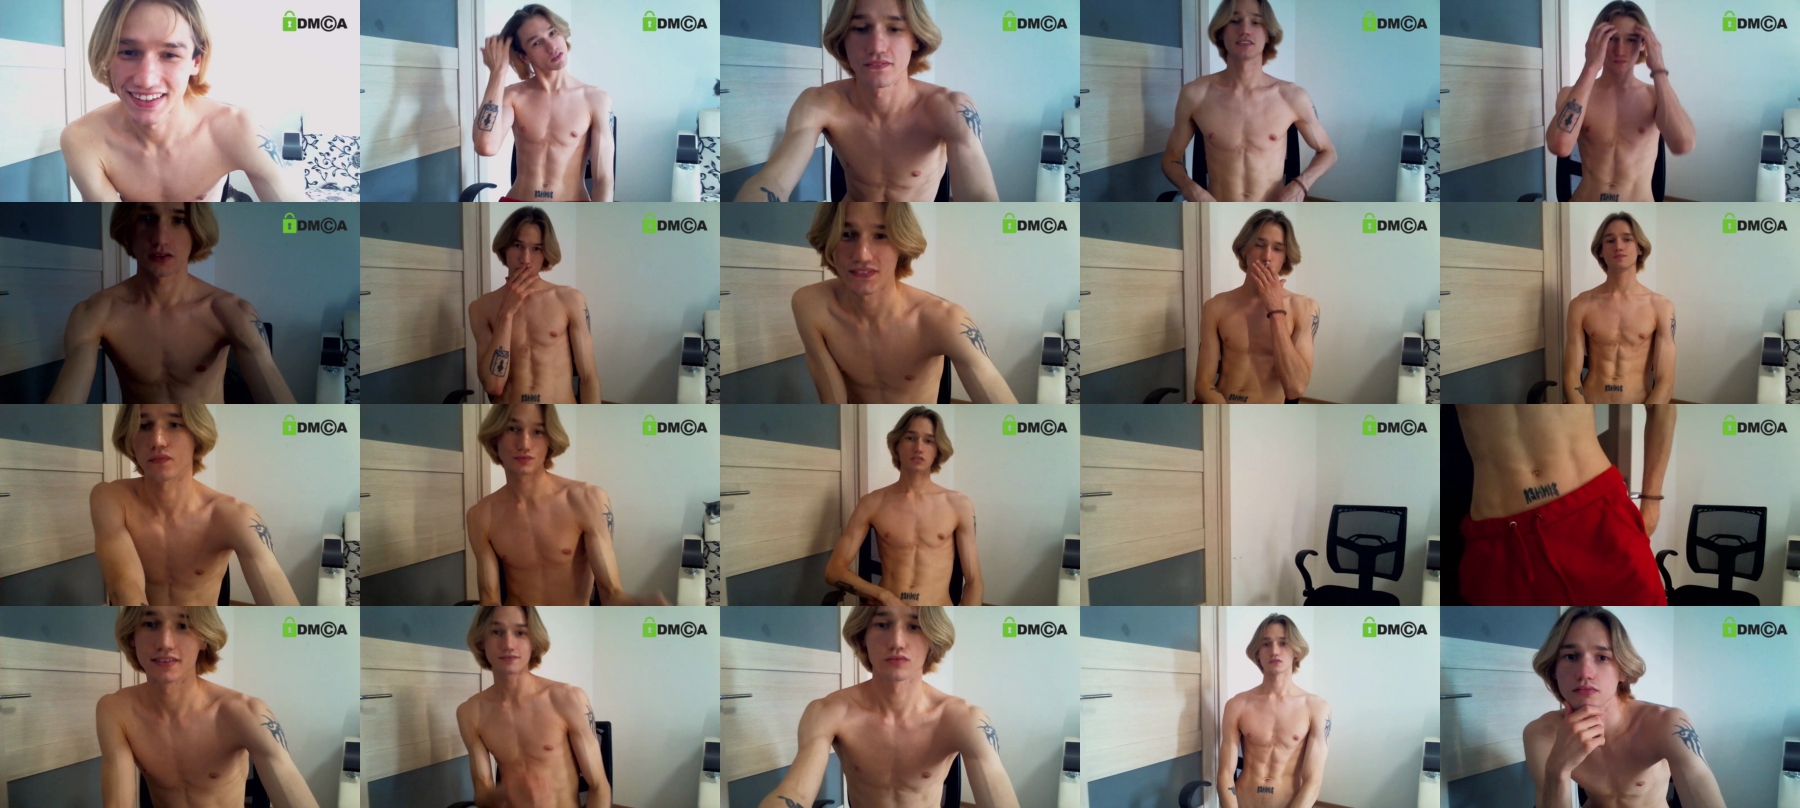 Rexxx_Erection  03-08-2021 Male Topless